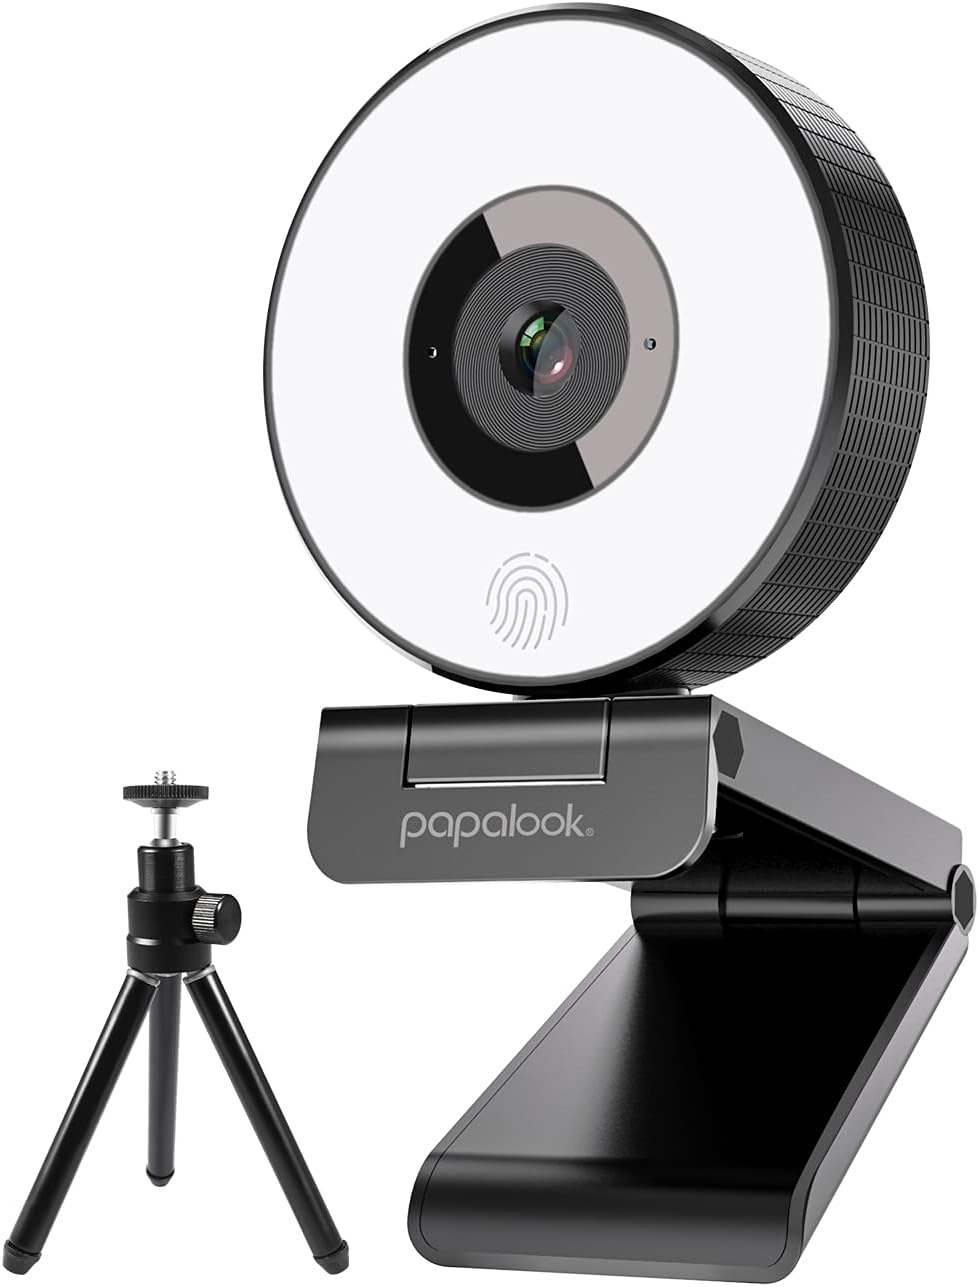 papalook 1080P Webcam with Ring Light and Tripod, [...]